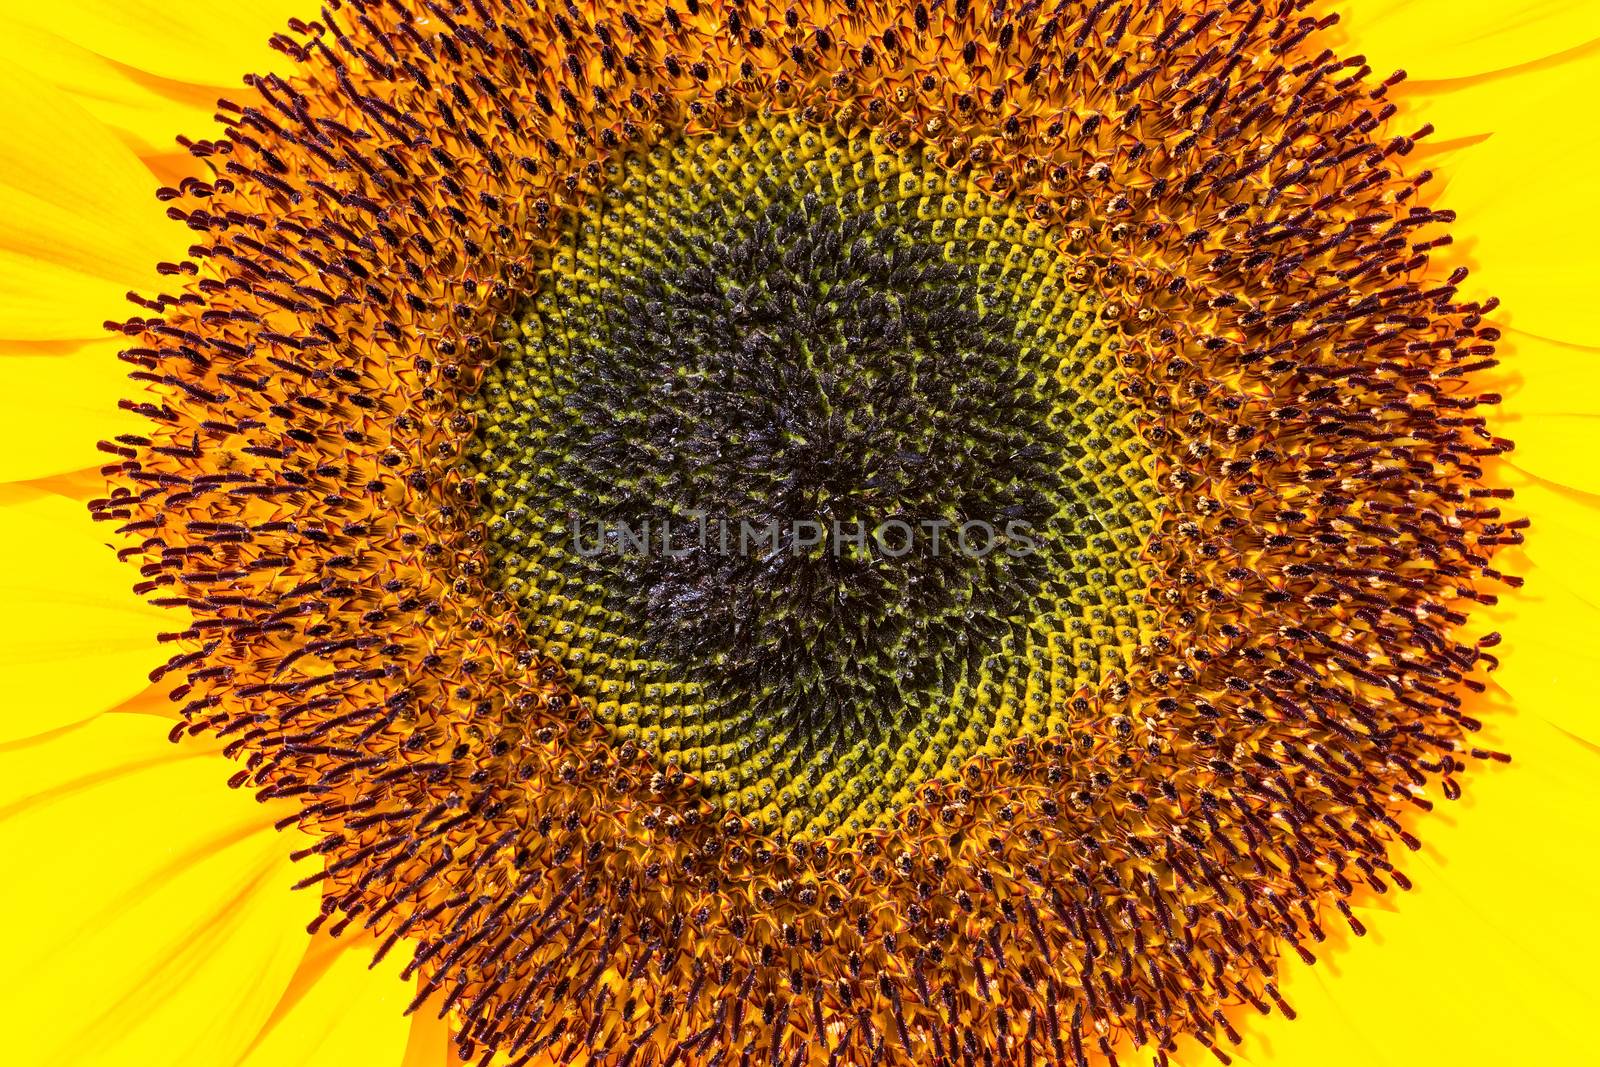 Close up middle of sunflower with stamens